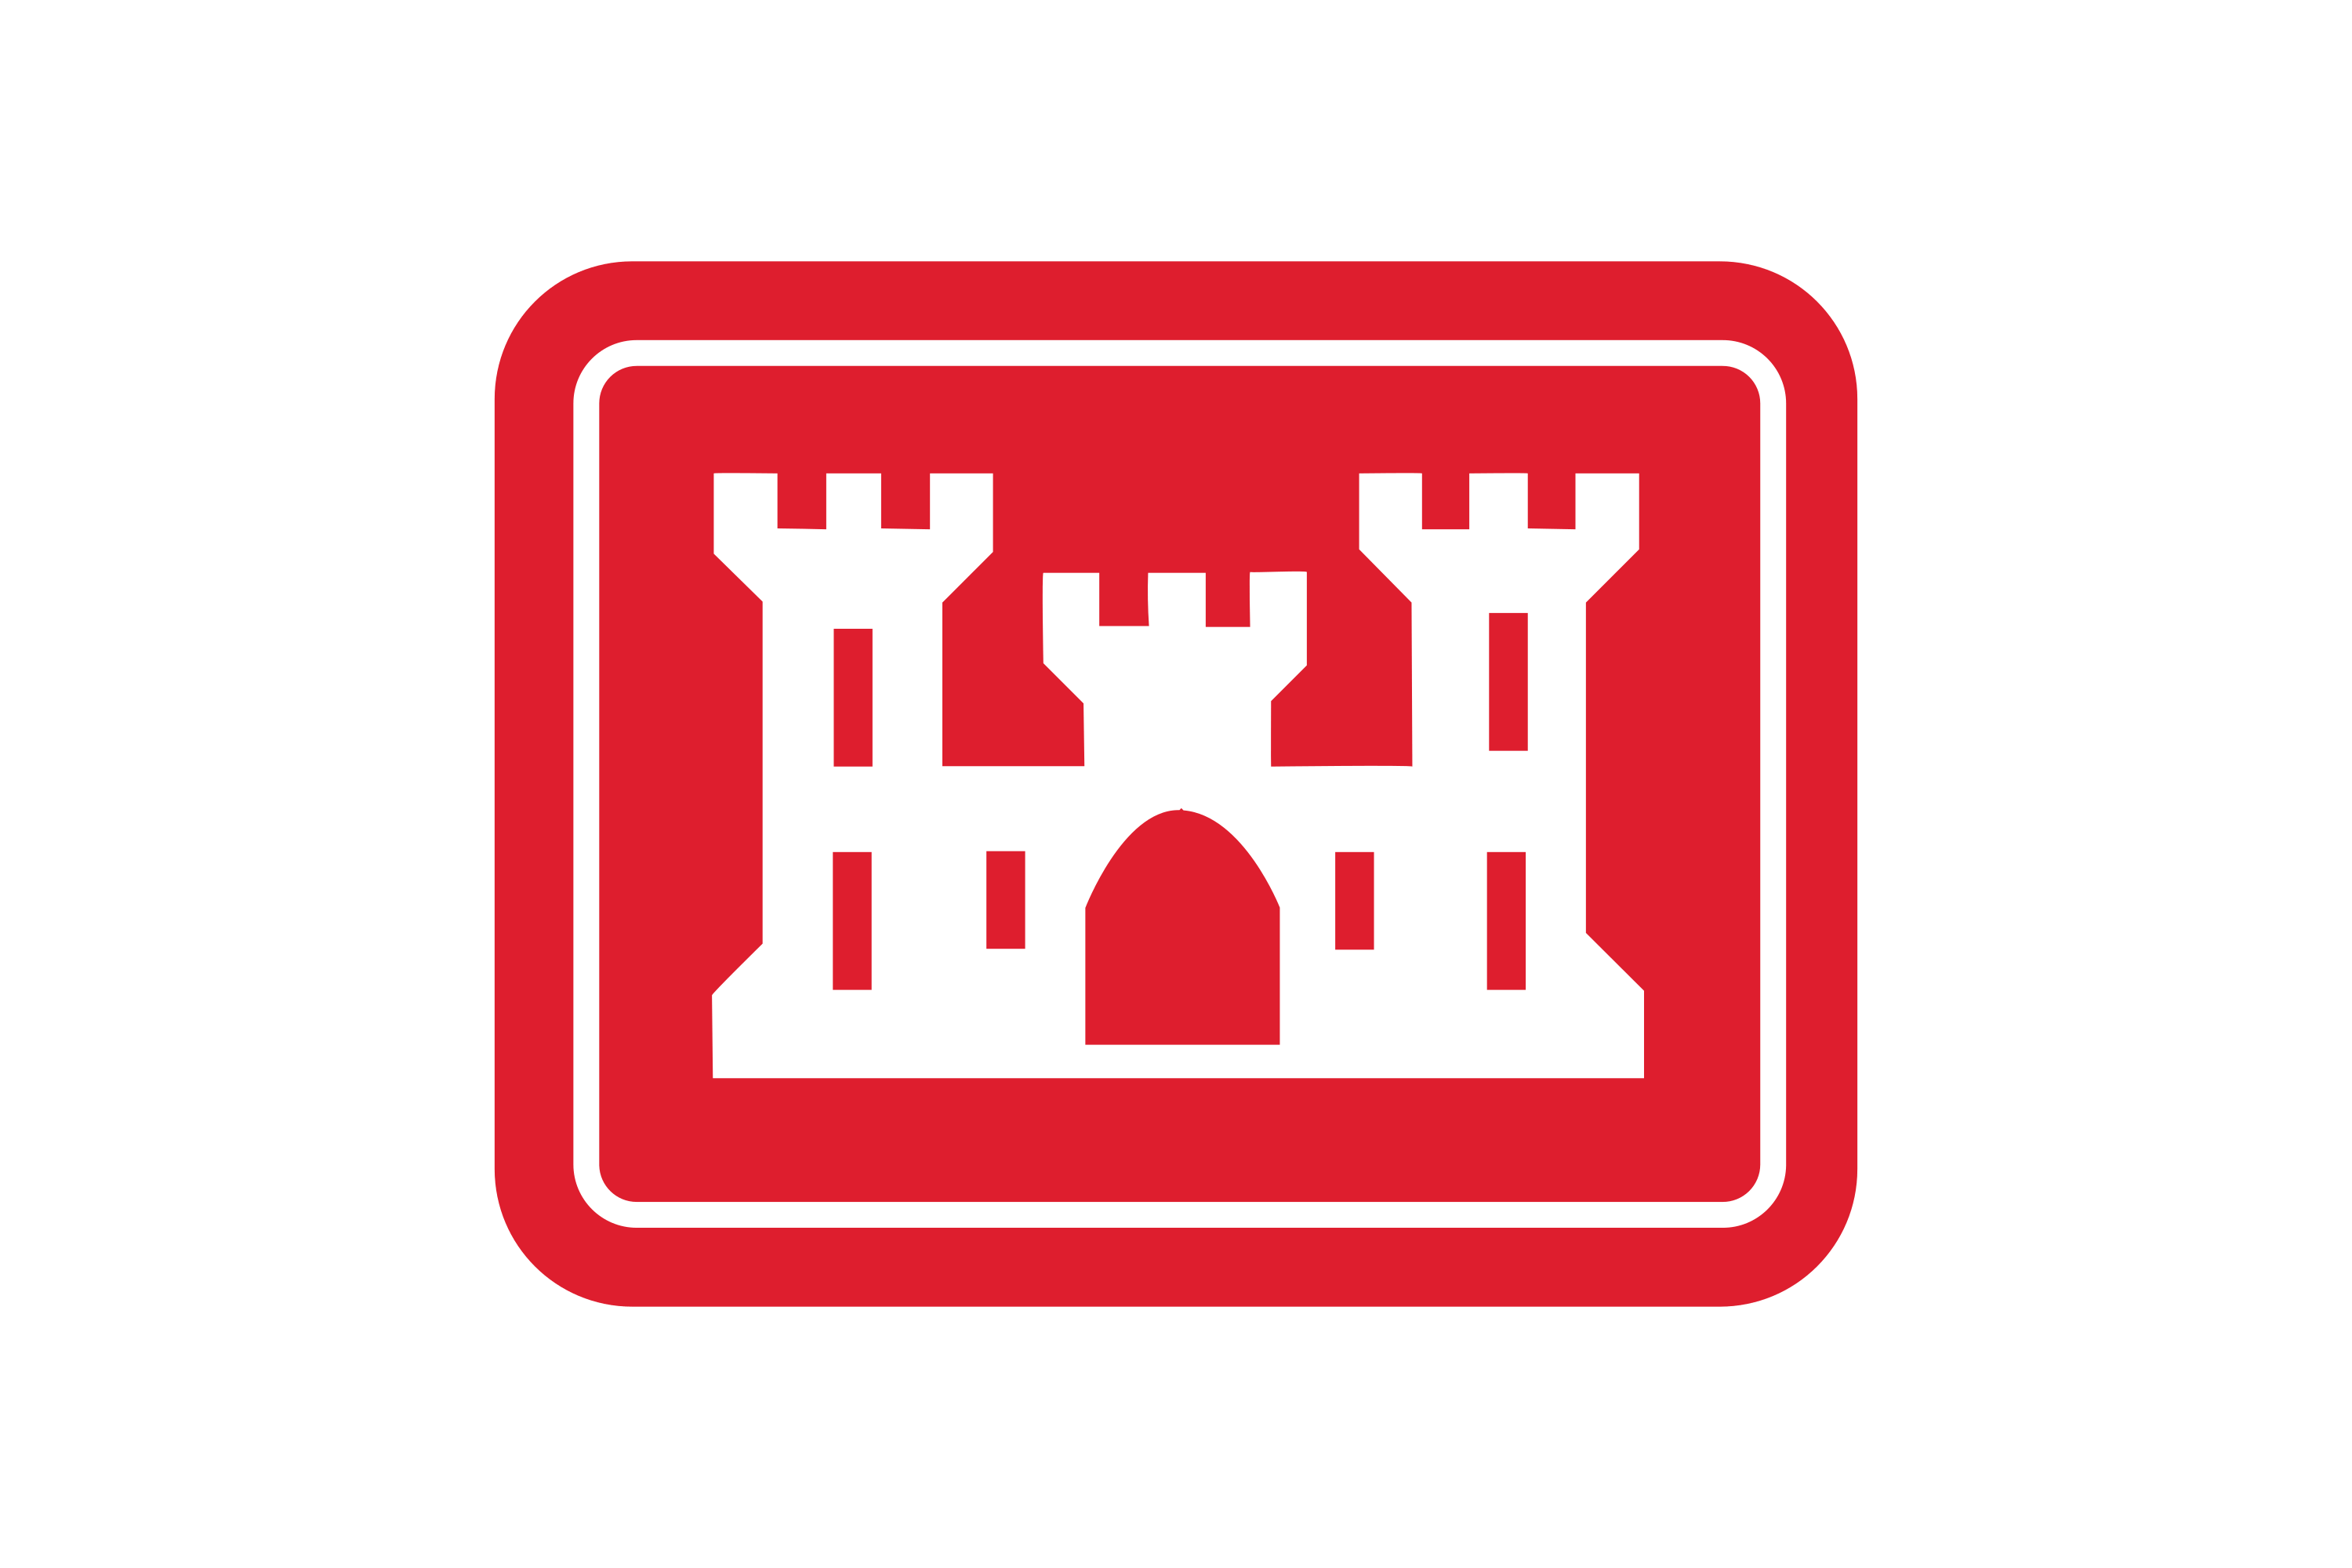 Download United States Army Corps of Engineers (USACE) Logo in SVG